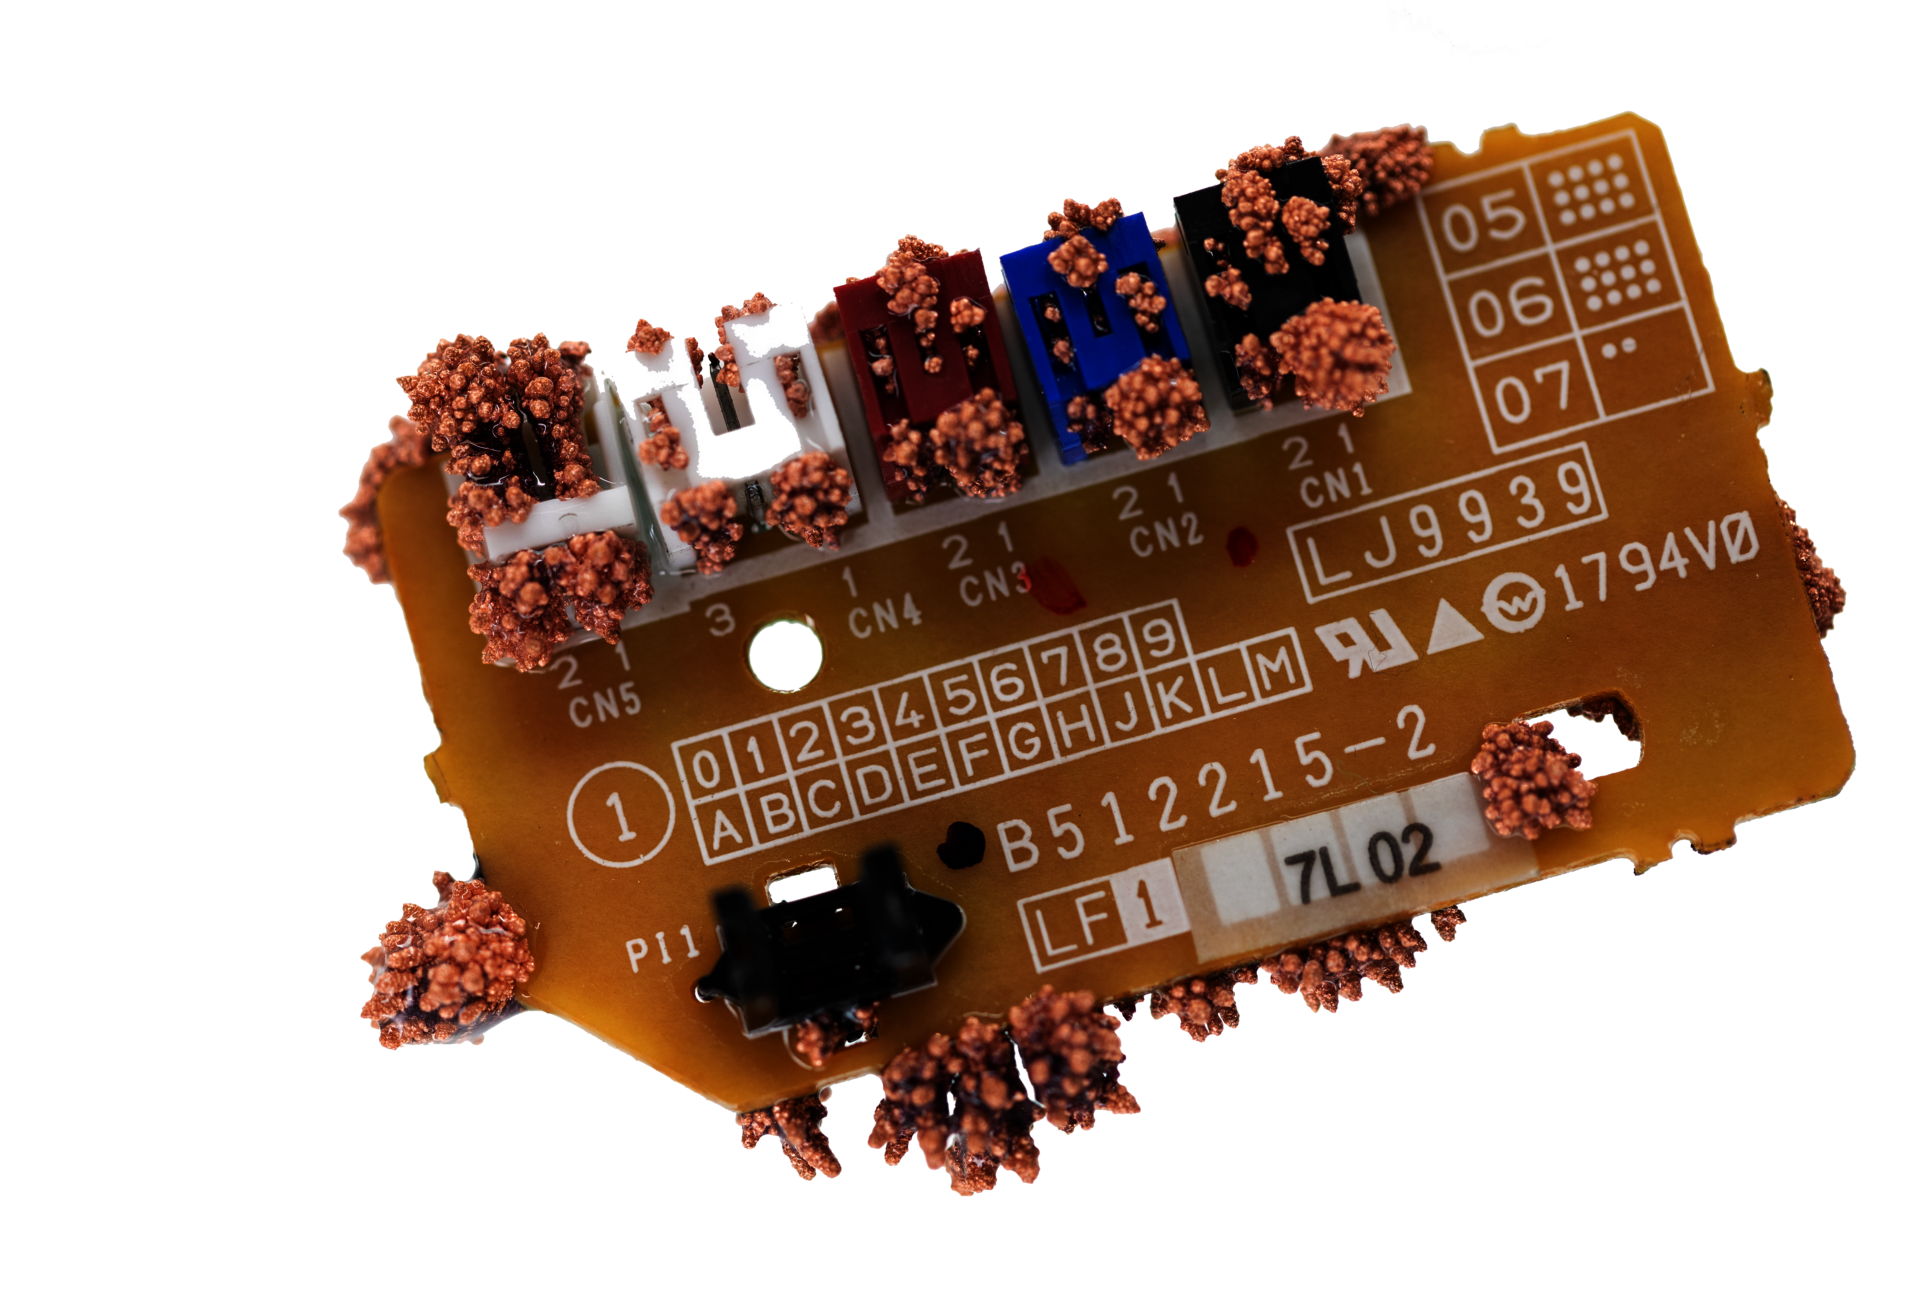 photograph of a small circuit board with copper crystals growing out of it